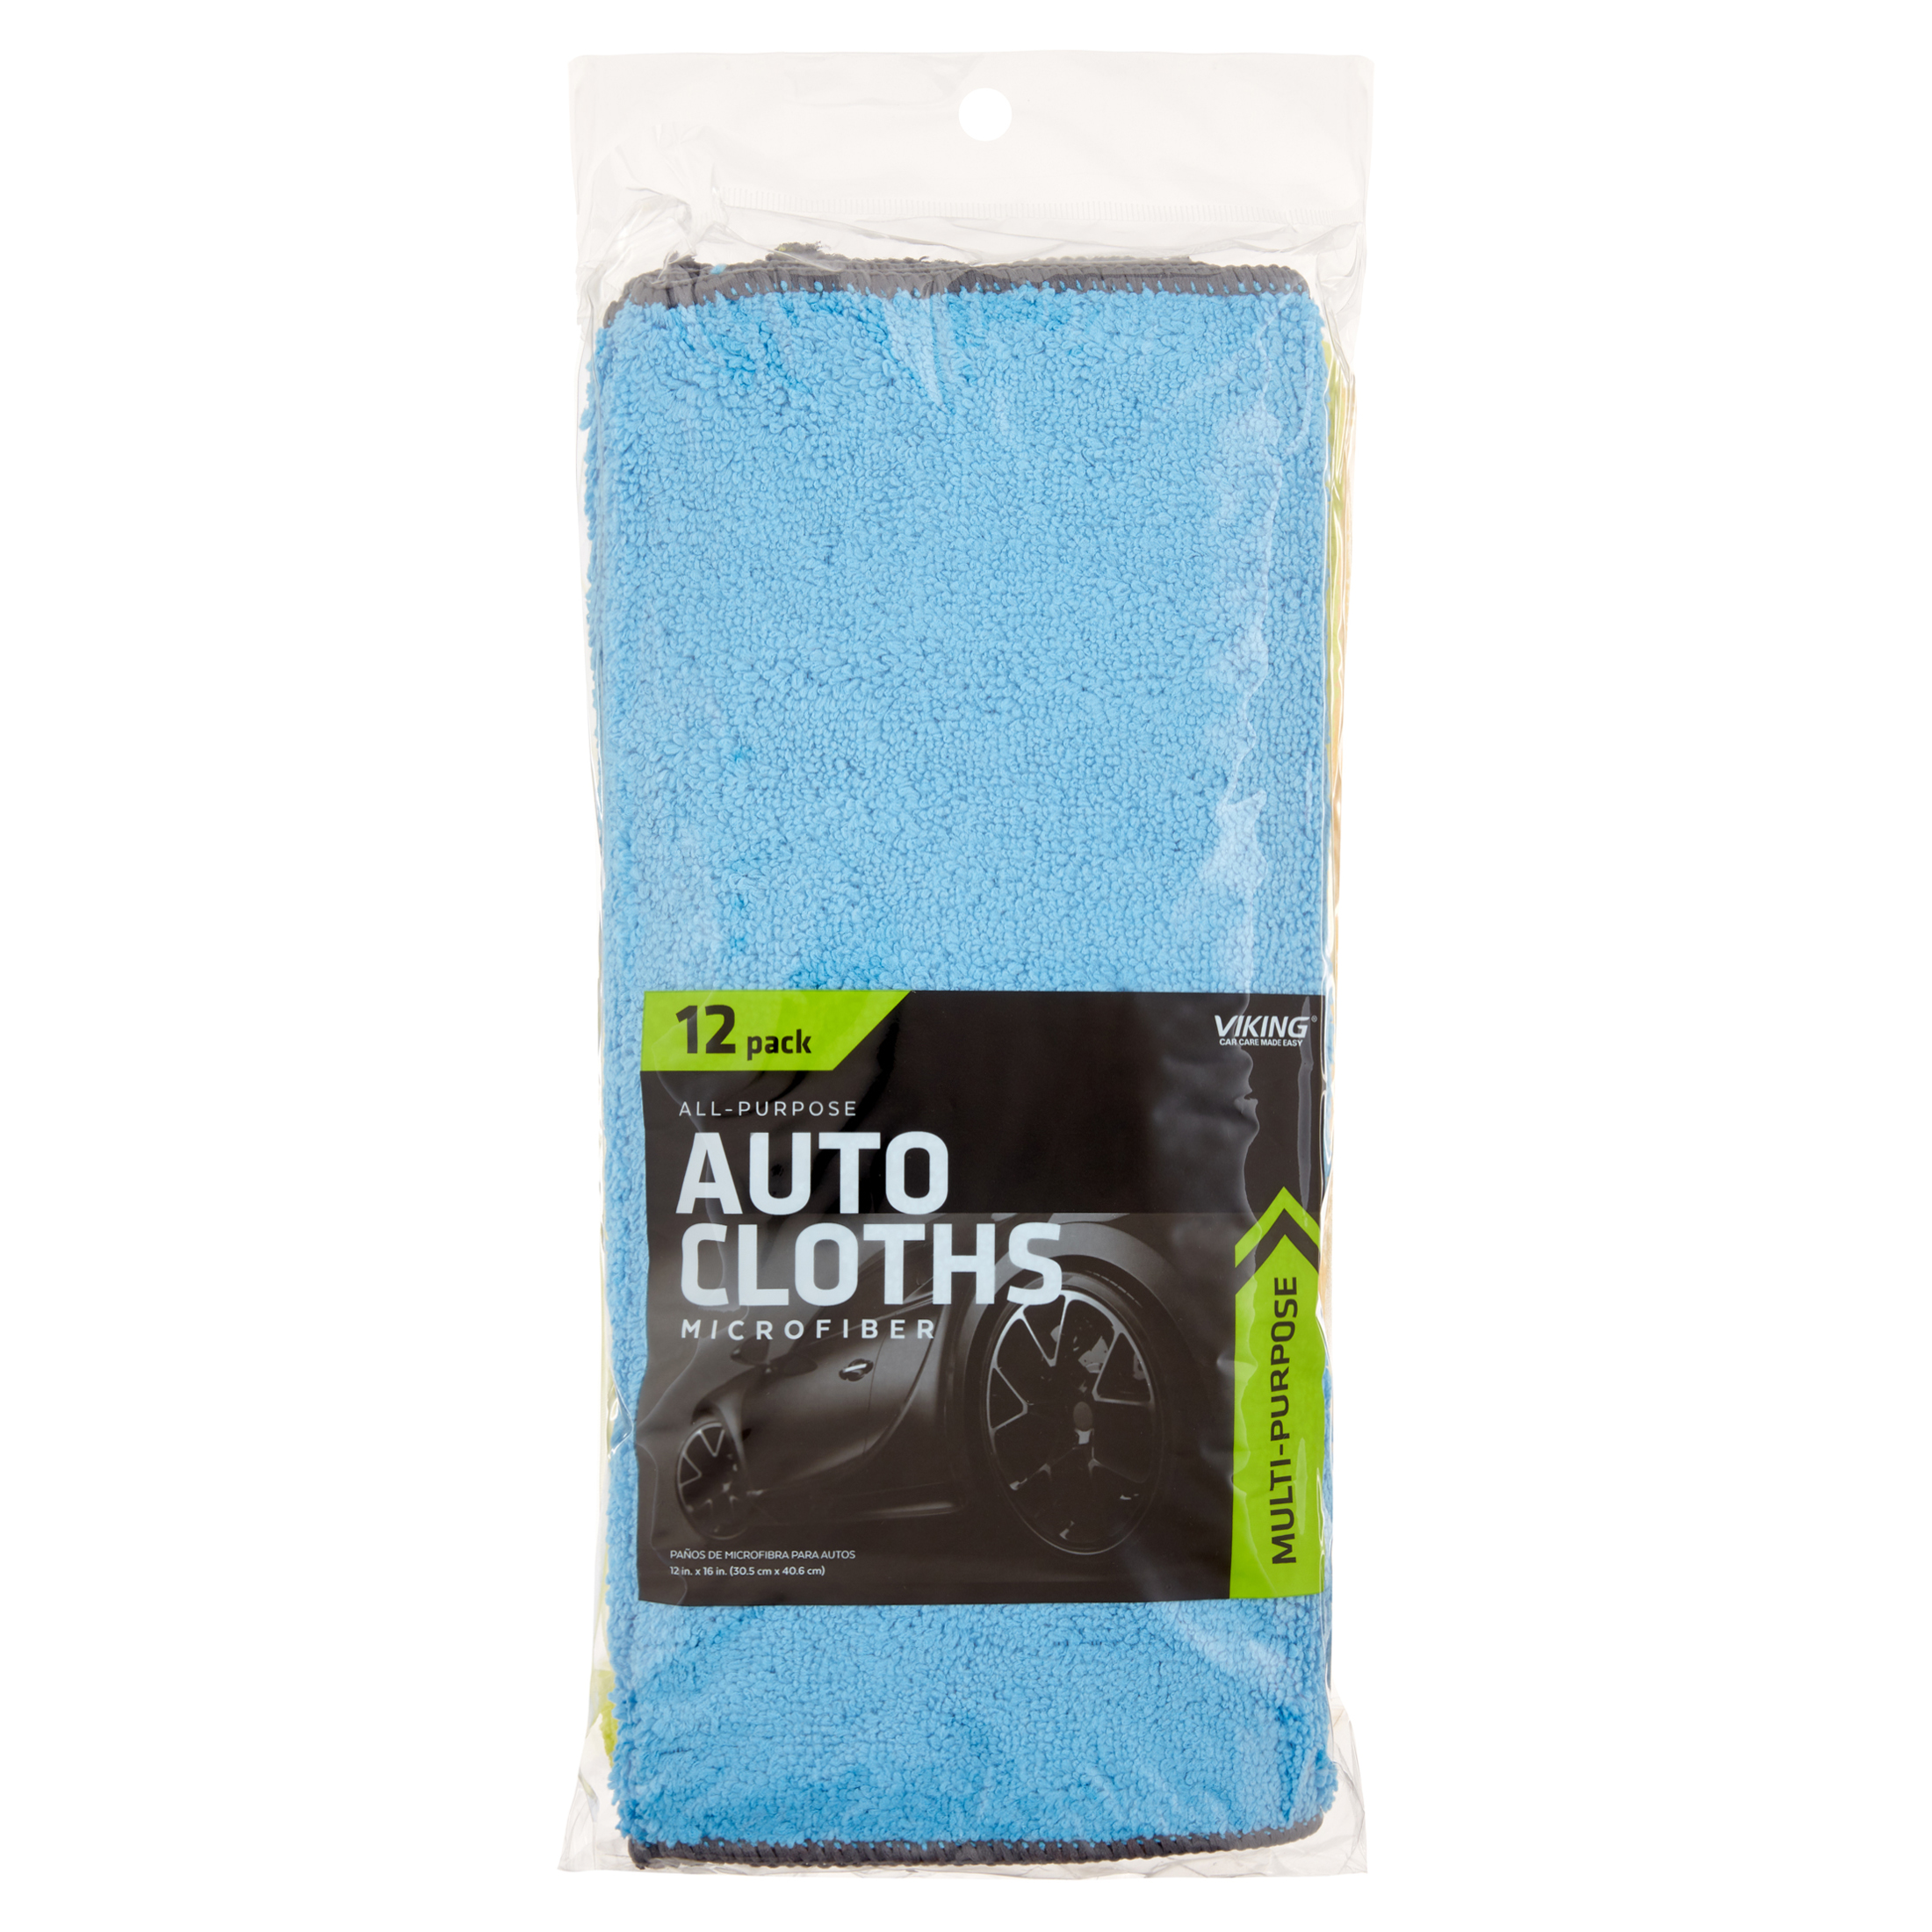 Viking Car Care Microfiber Auto Cleaning Cloth, 12 Pack Towels - image 5 of 10